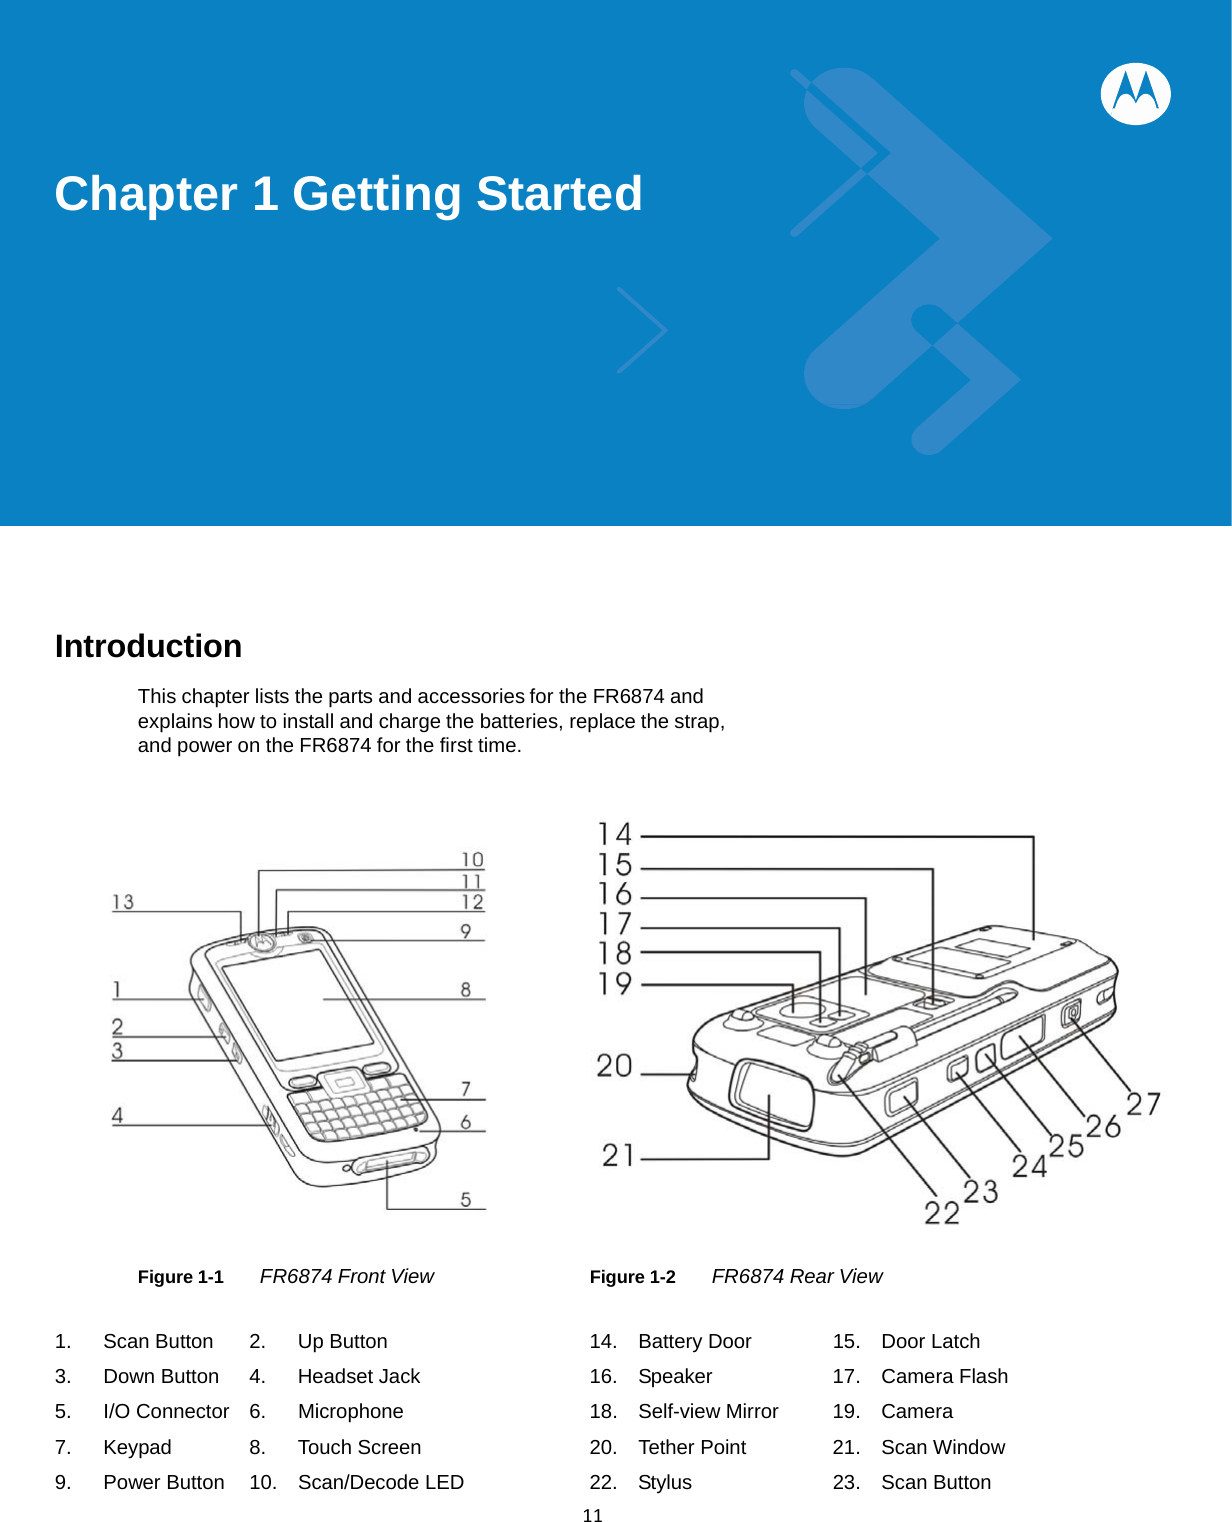  11Chapter 1 Getting Started            Introduction  This chapter lists the parts and accessories for the FR6874 and explains how to install and charge the batteries, replace the strap, and power on the FR6874 for the first time.                                    Figure 1-1      FR6874 Front View    Figure 1-2    FR6874 Rear View   1.  Scan Button    2.  Up Button               14.  Battery Door     15.  Door Latch 3. Down Button   4. Headset Jack    16. Speaker    17. Camera Flash  5. I/O Connector  6. Microphone    18. Self-view Mirror  19. Camera 7.  Keypad        8.  Touch Screen        20.  Tether Point     21.  Scan Window   9. Power Button   10. Scan/Decode LED   22. Stylus    23. Scan Button 